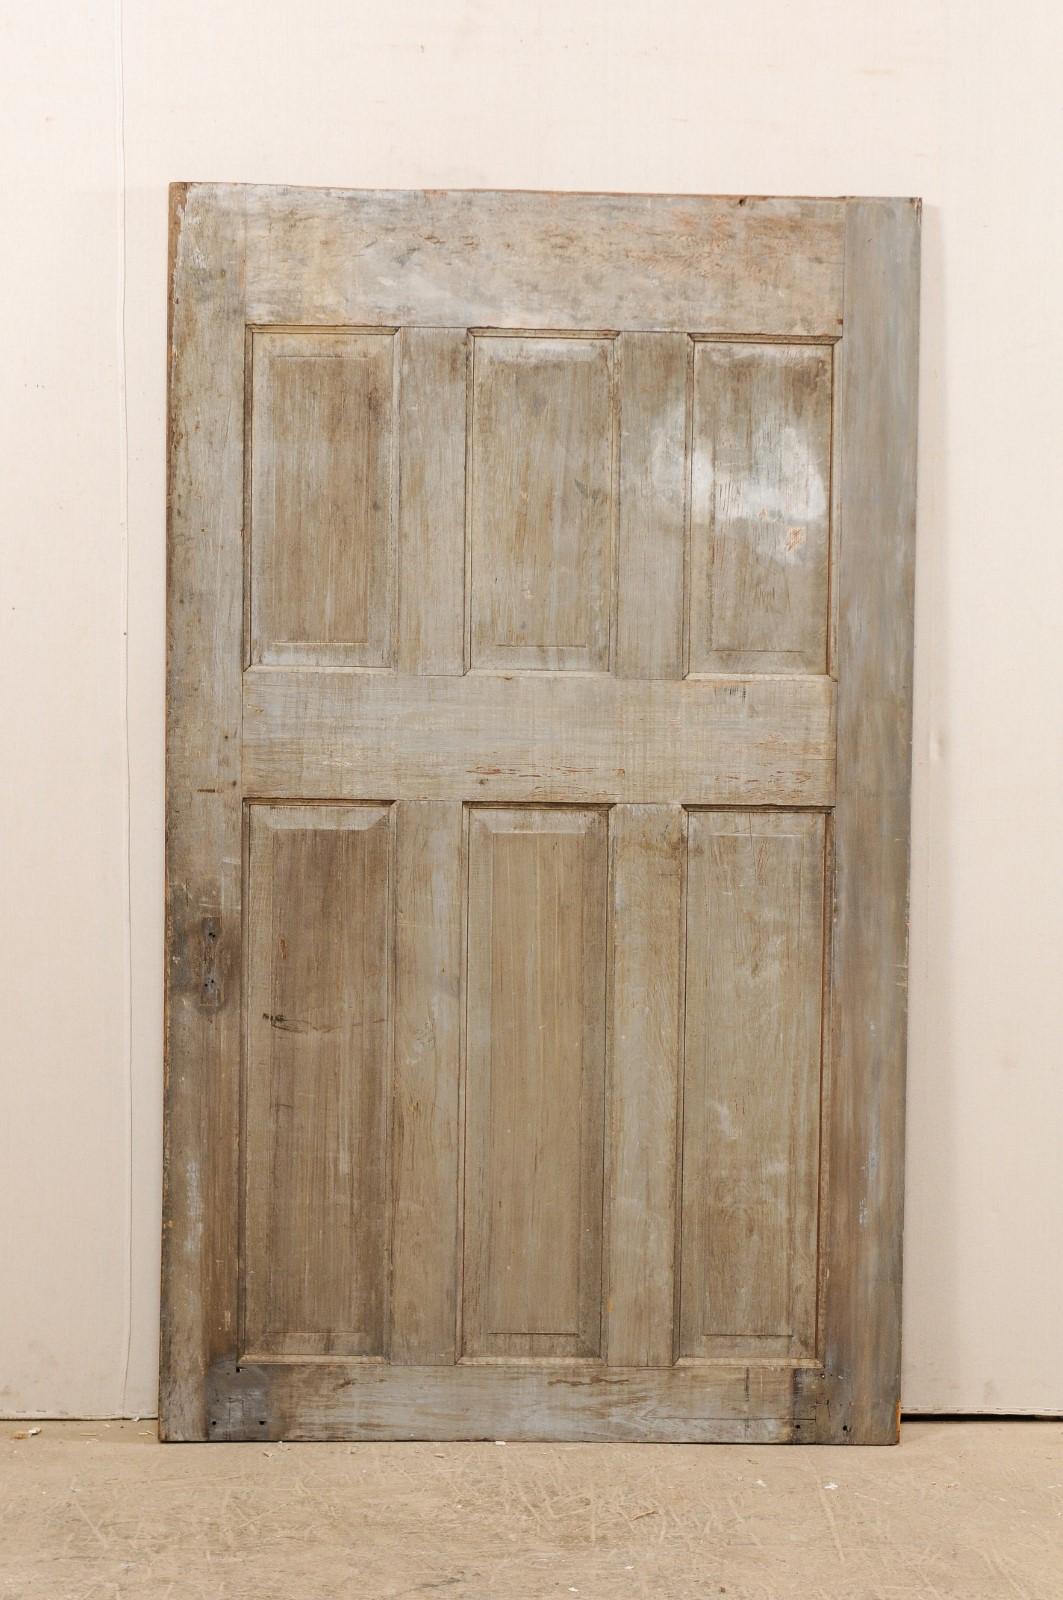 A single European 19th century six-panel wood door. This antique door with nicely-sized width features six raised panels at both front and back sides. Each door has three shorter vertically positioned rectangular-shaped panels sitting directly about